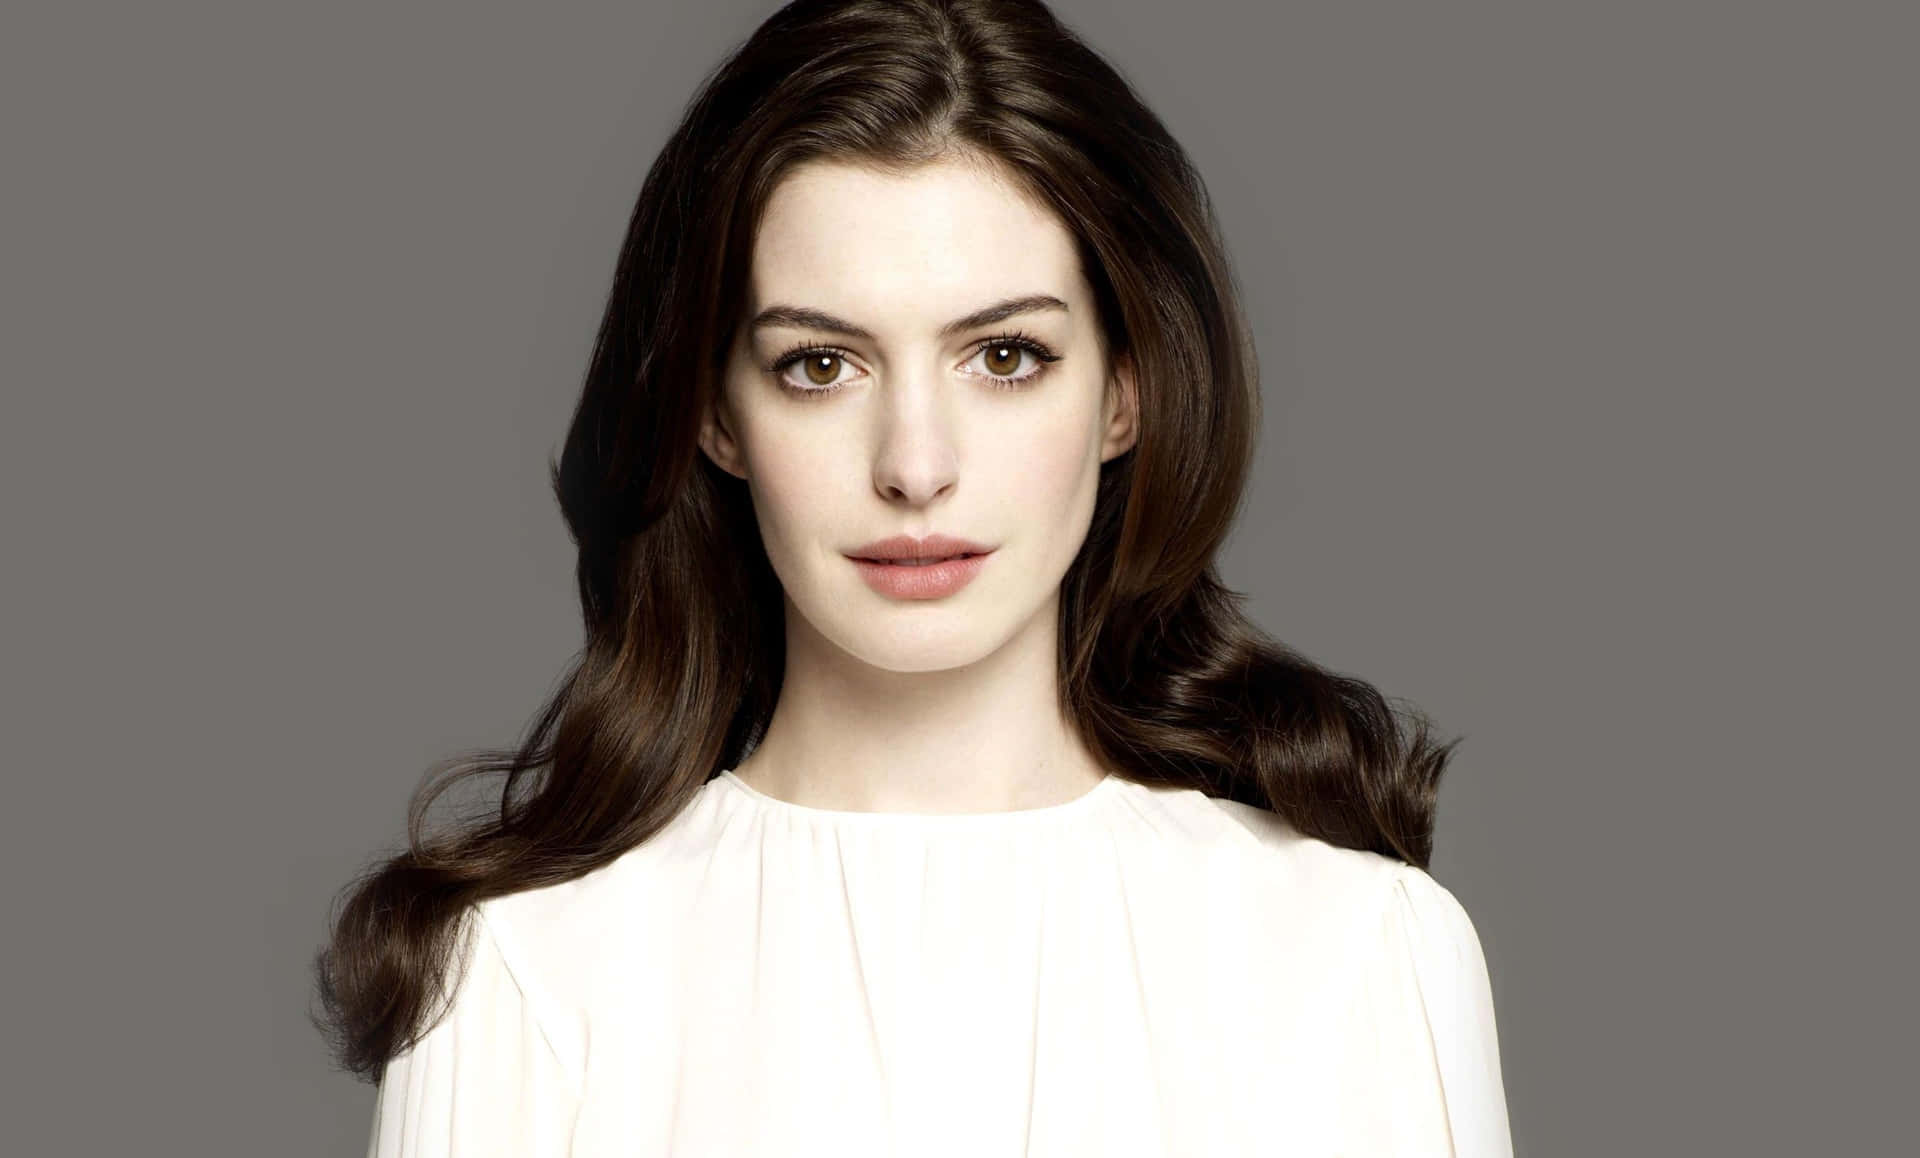 Anne Hathaway - Strong Actress and Producer